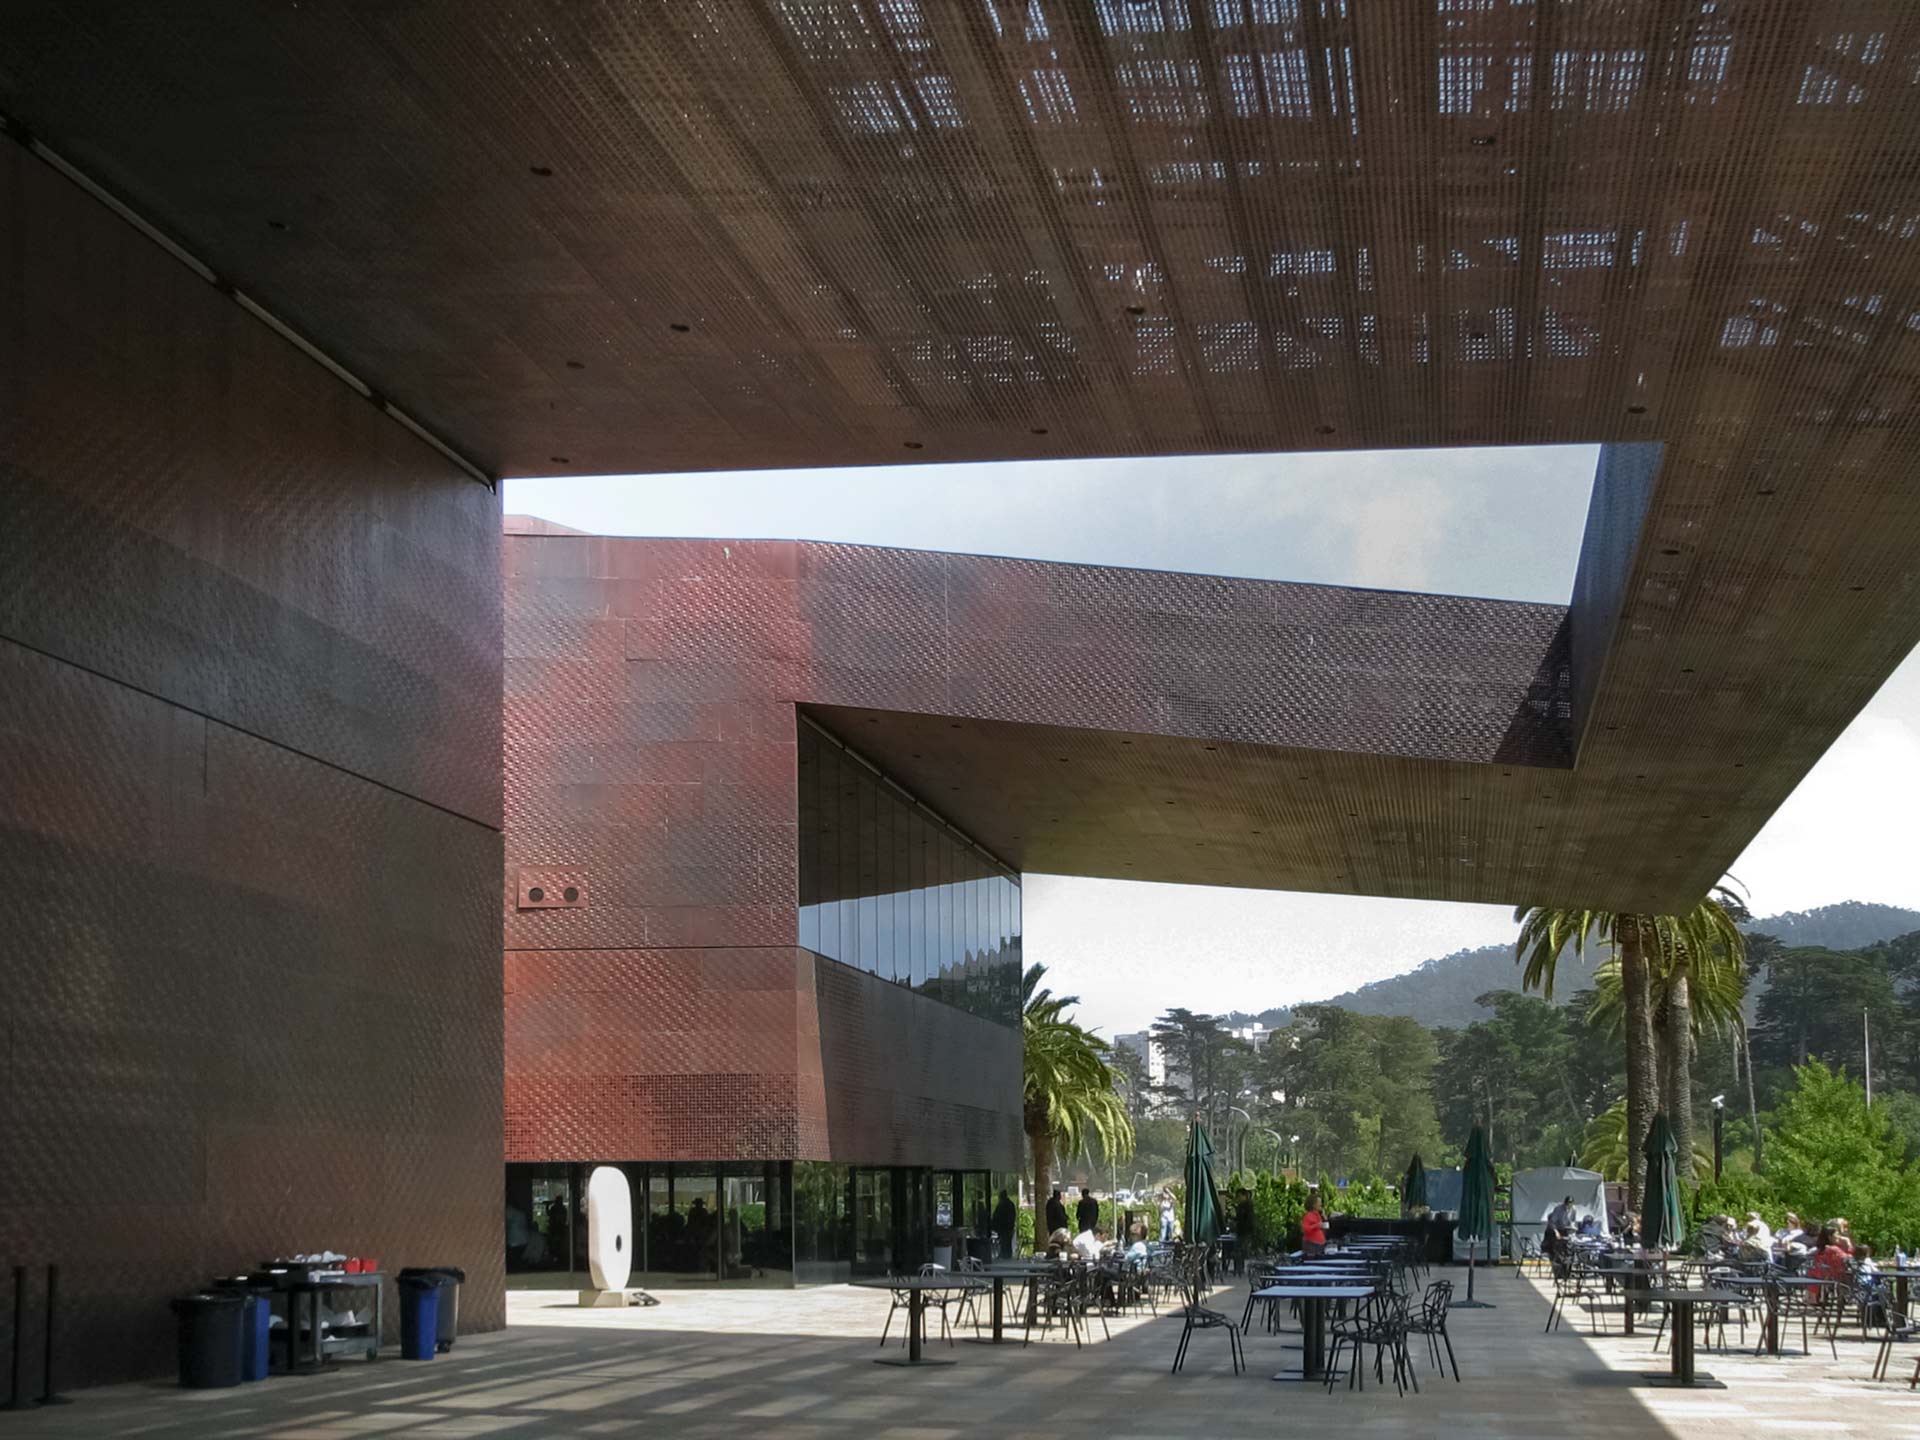 Outdoor cafe under the de Young Museum canopy awning